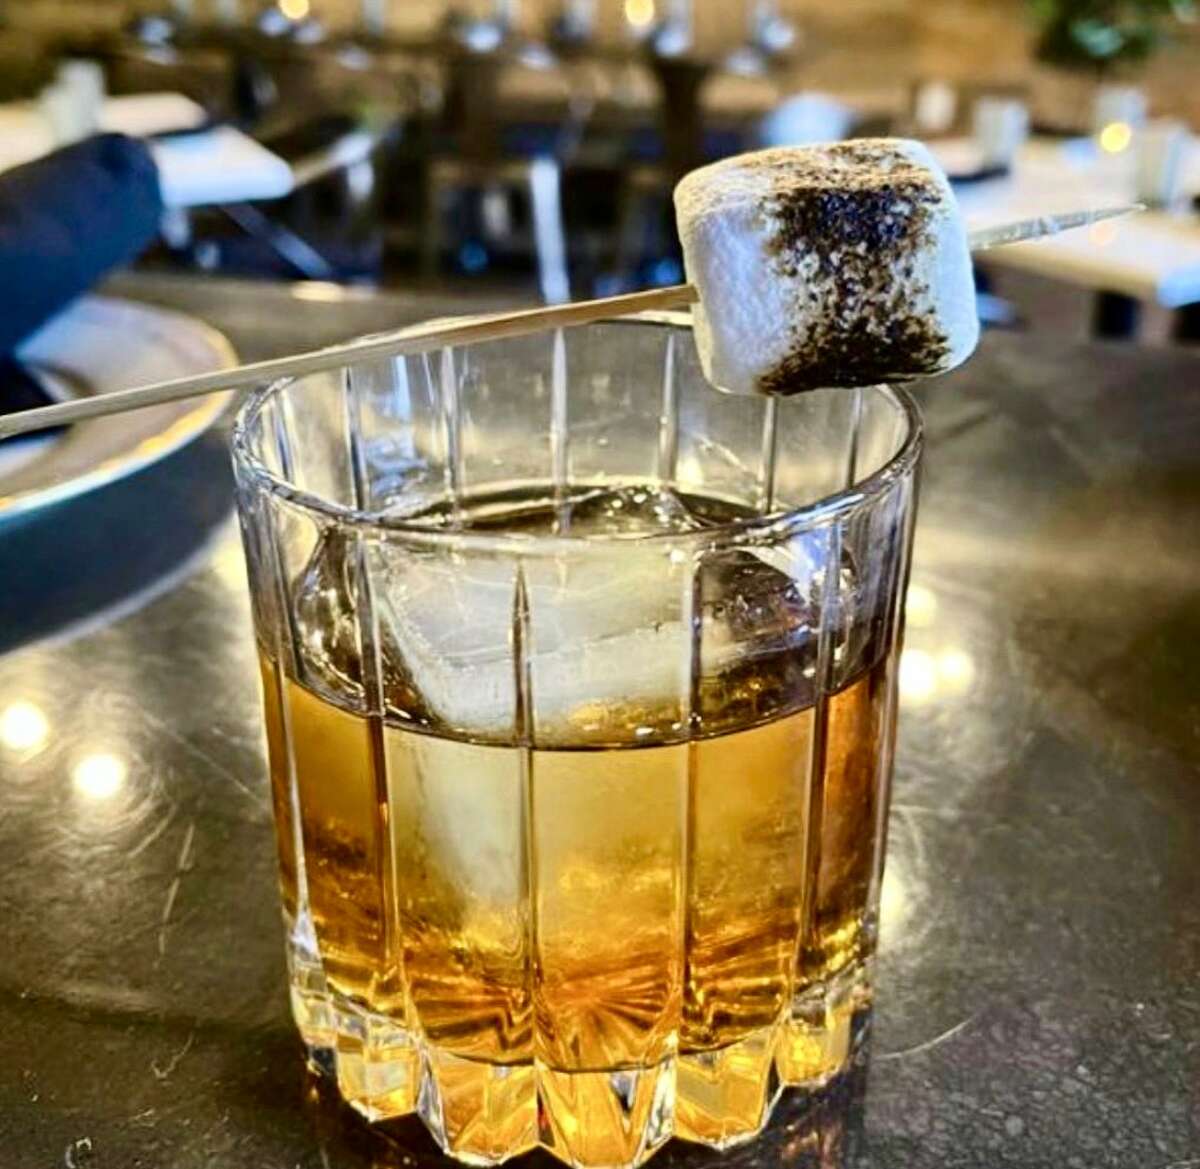 Making you wanting s'more, here's the Campfire Old Fashioned from The Nest in Schenectady.